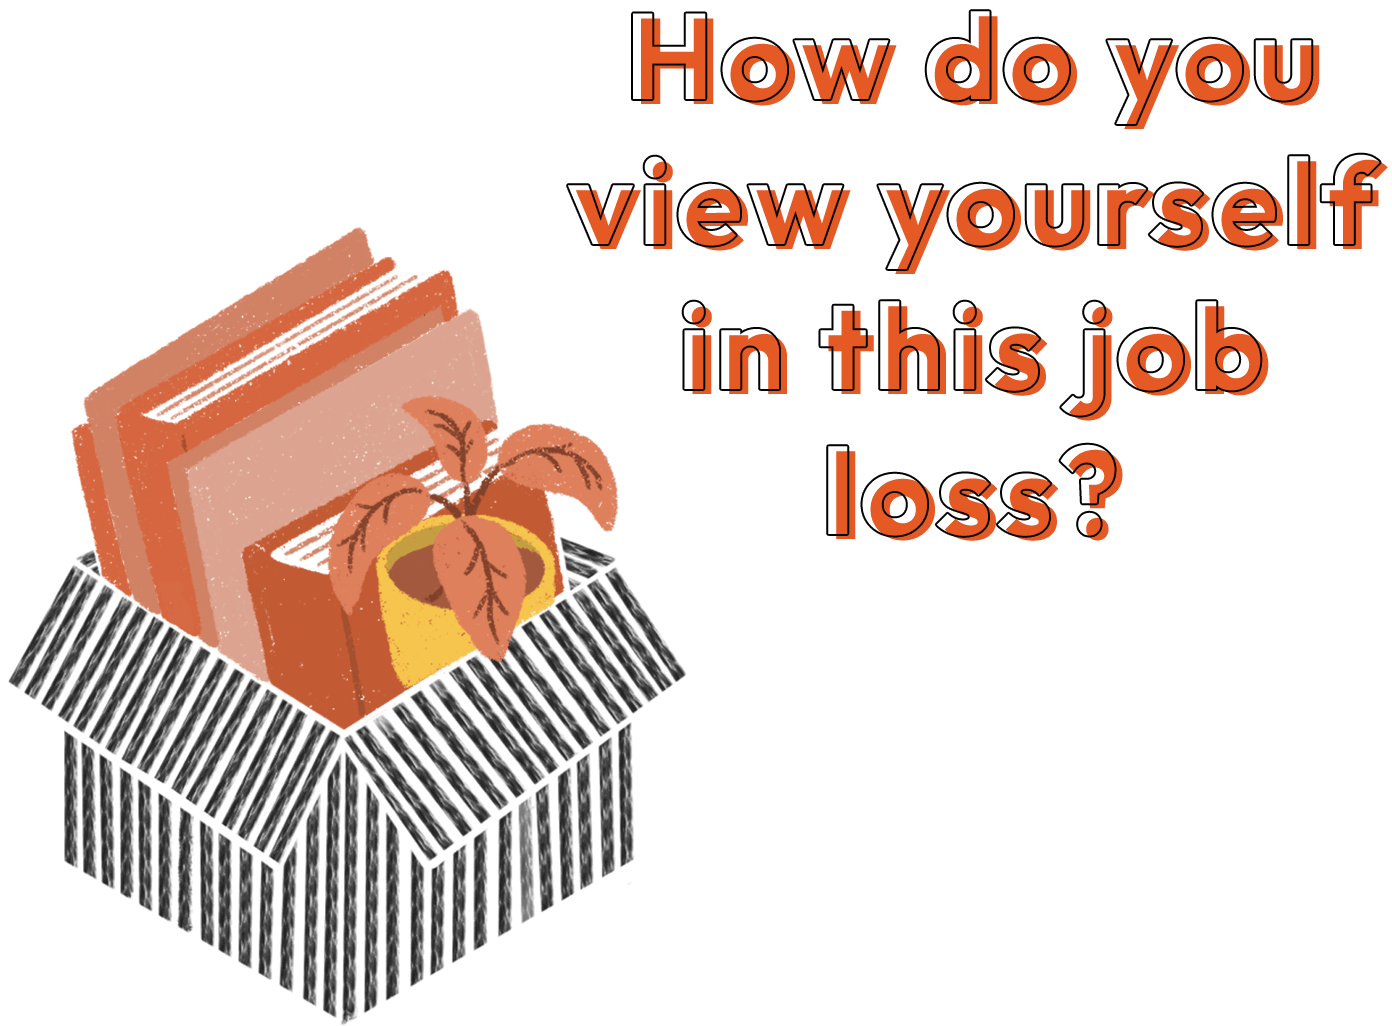 How do you view yourself in this job loss?